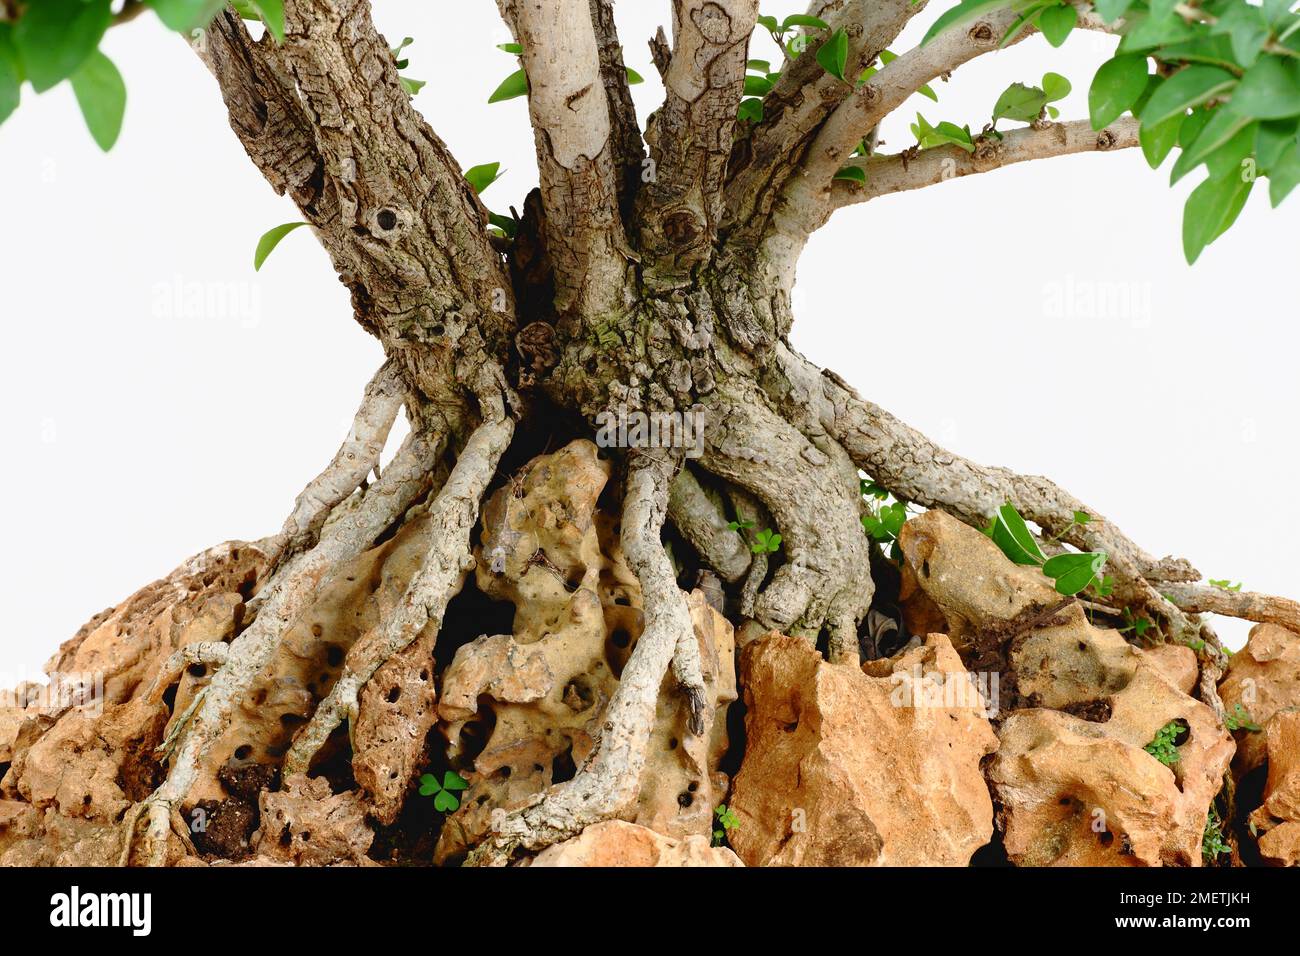 Gmelina, gripping roots Stock Photo